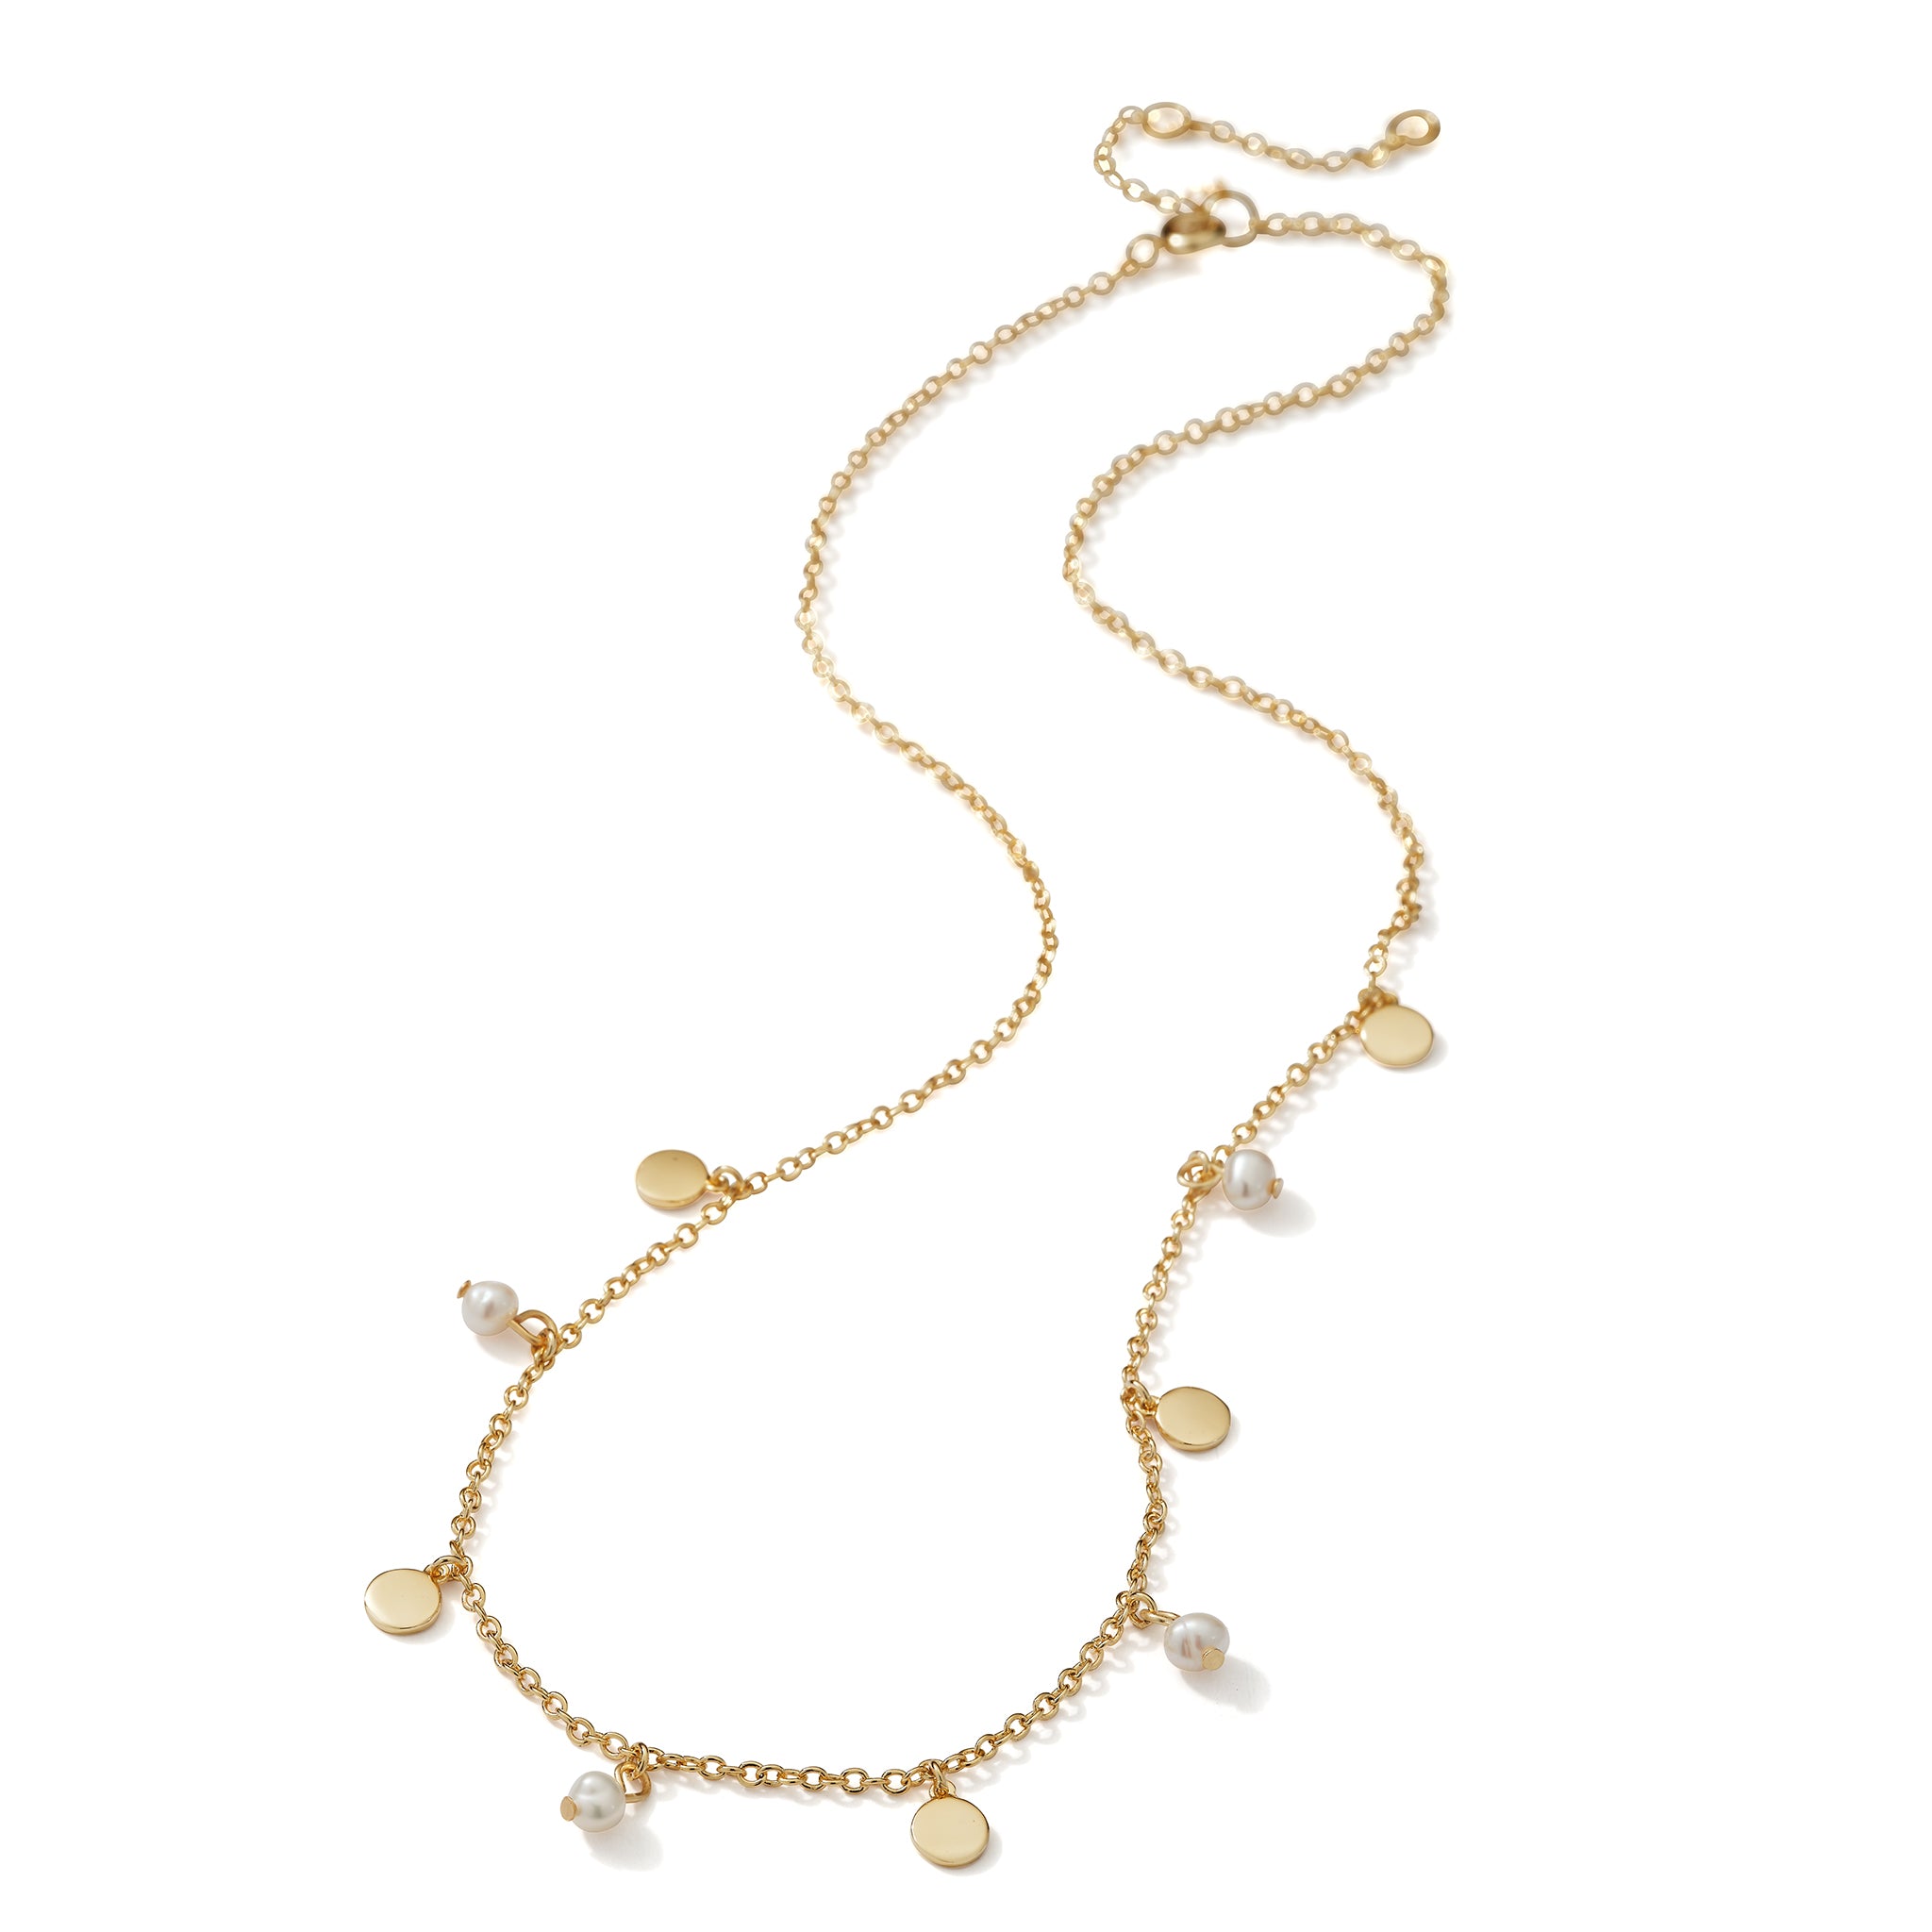 THE MAKERY BRASS DISCS AND FRESHWATER PEARL BEADS NECKLACE